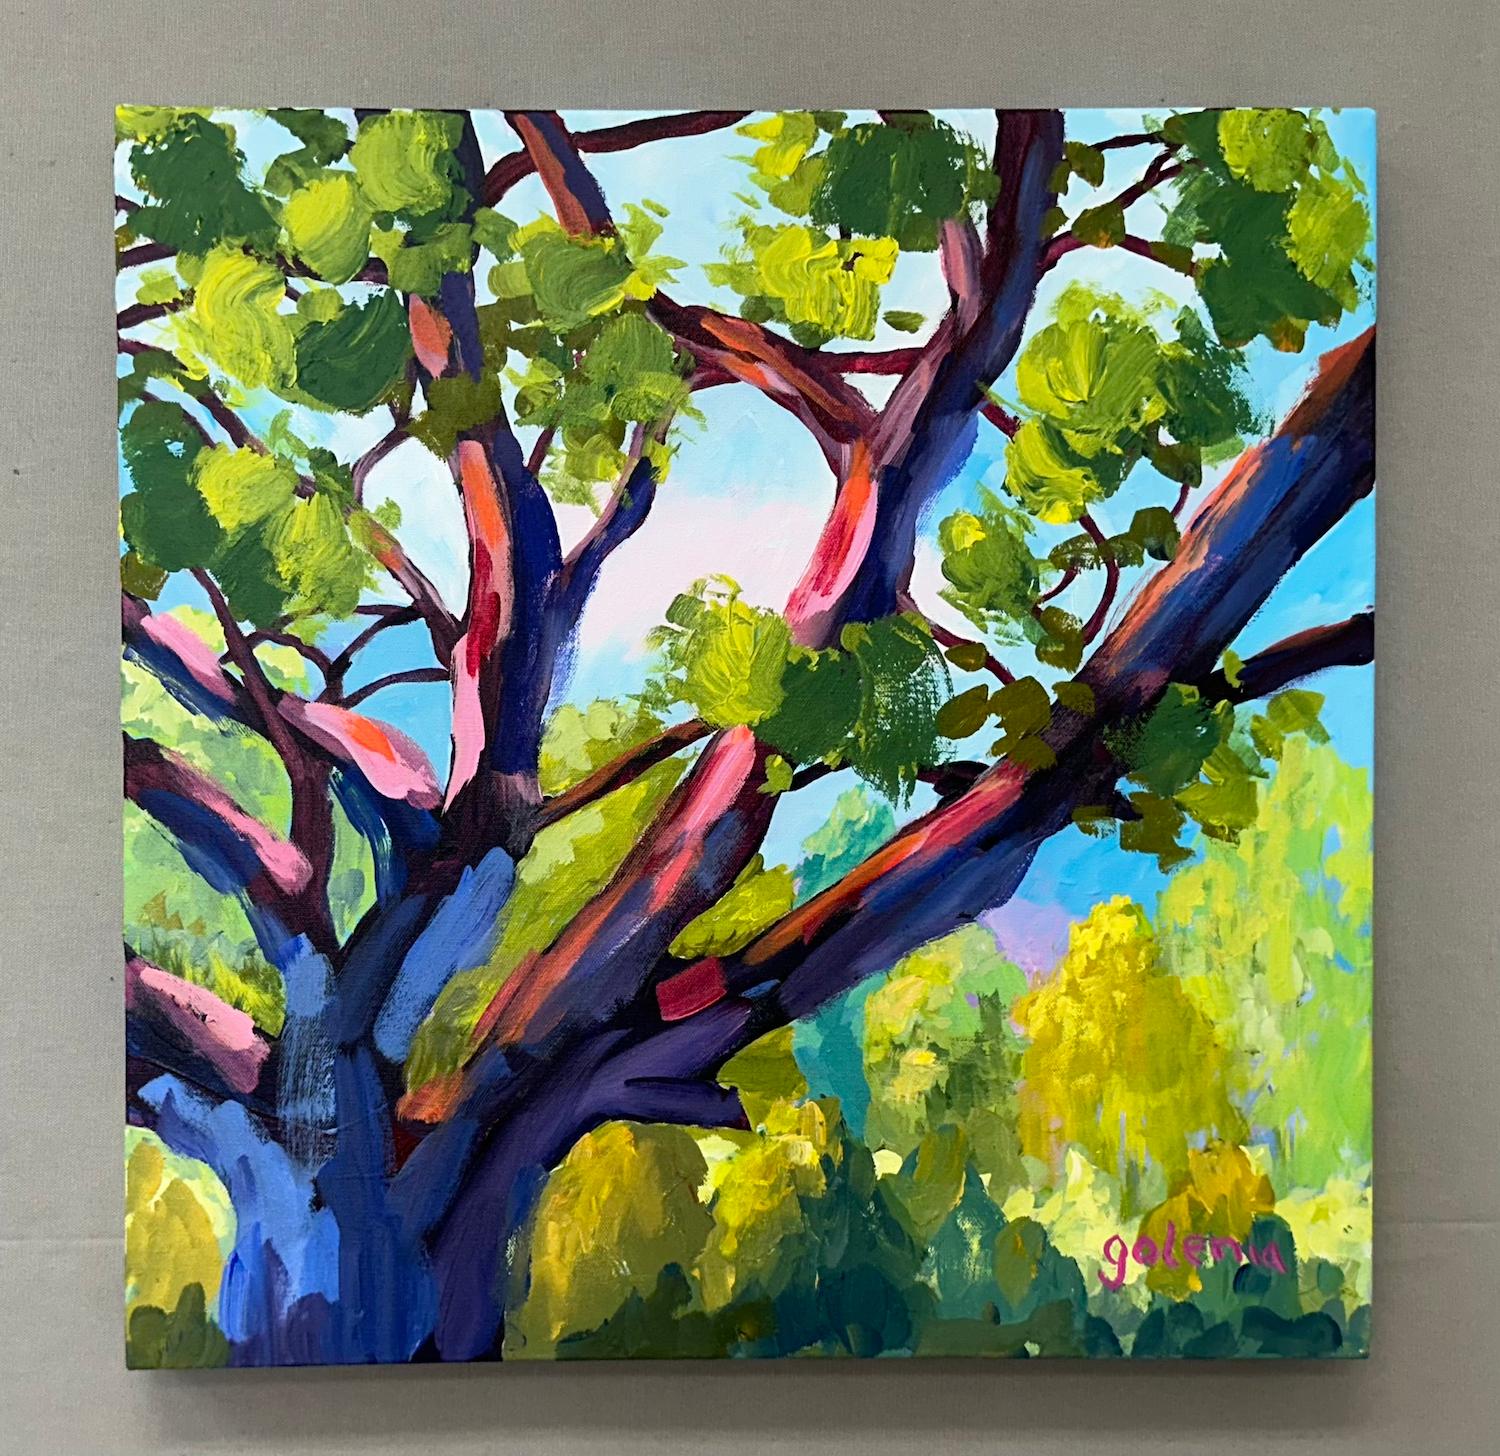 <p>Artist Comments<br>With a contrasting cool-hued trunk and sun-kissed branches and leaves, an oak tree boasts a stylized image. Under the brilliant sky, the surrounding woodland glows in the sun. Bold and impressionistic brushstrokes imbue the